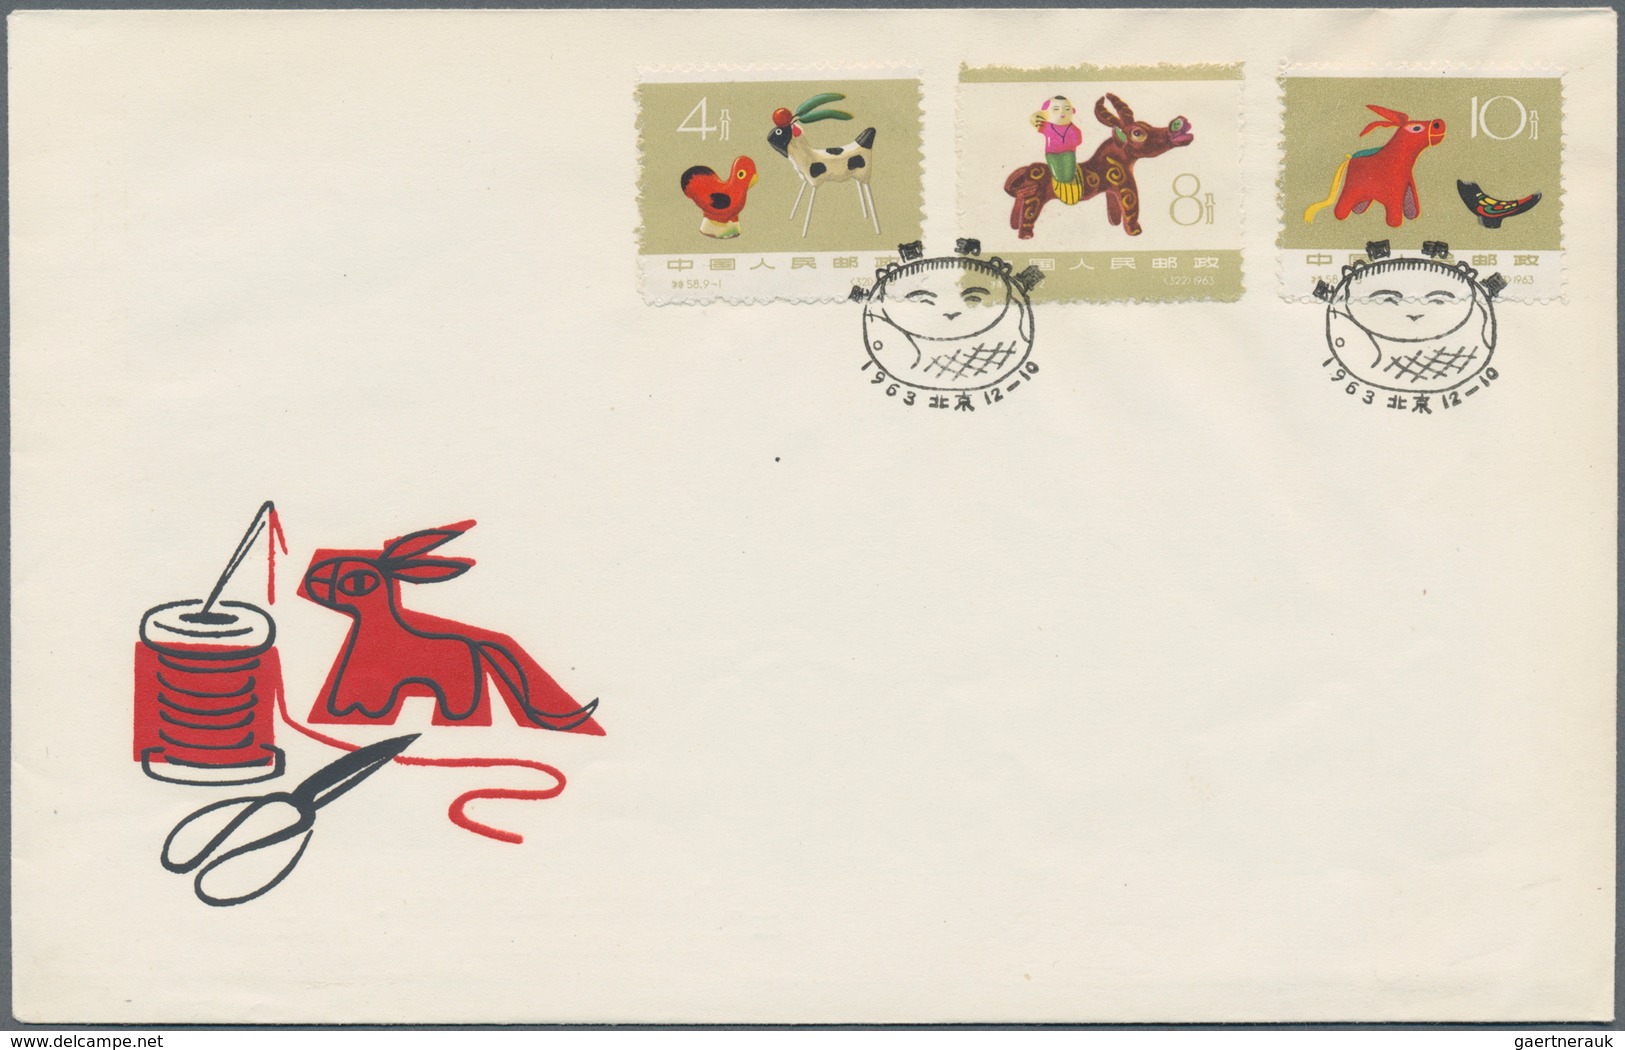 China - Volksrepublik: 1963/64, 6 FDC sets, bearing the full sets of C101, C102, C103, C104, S58, an